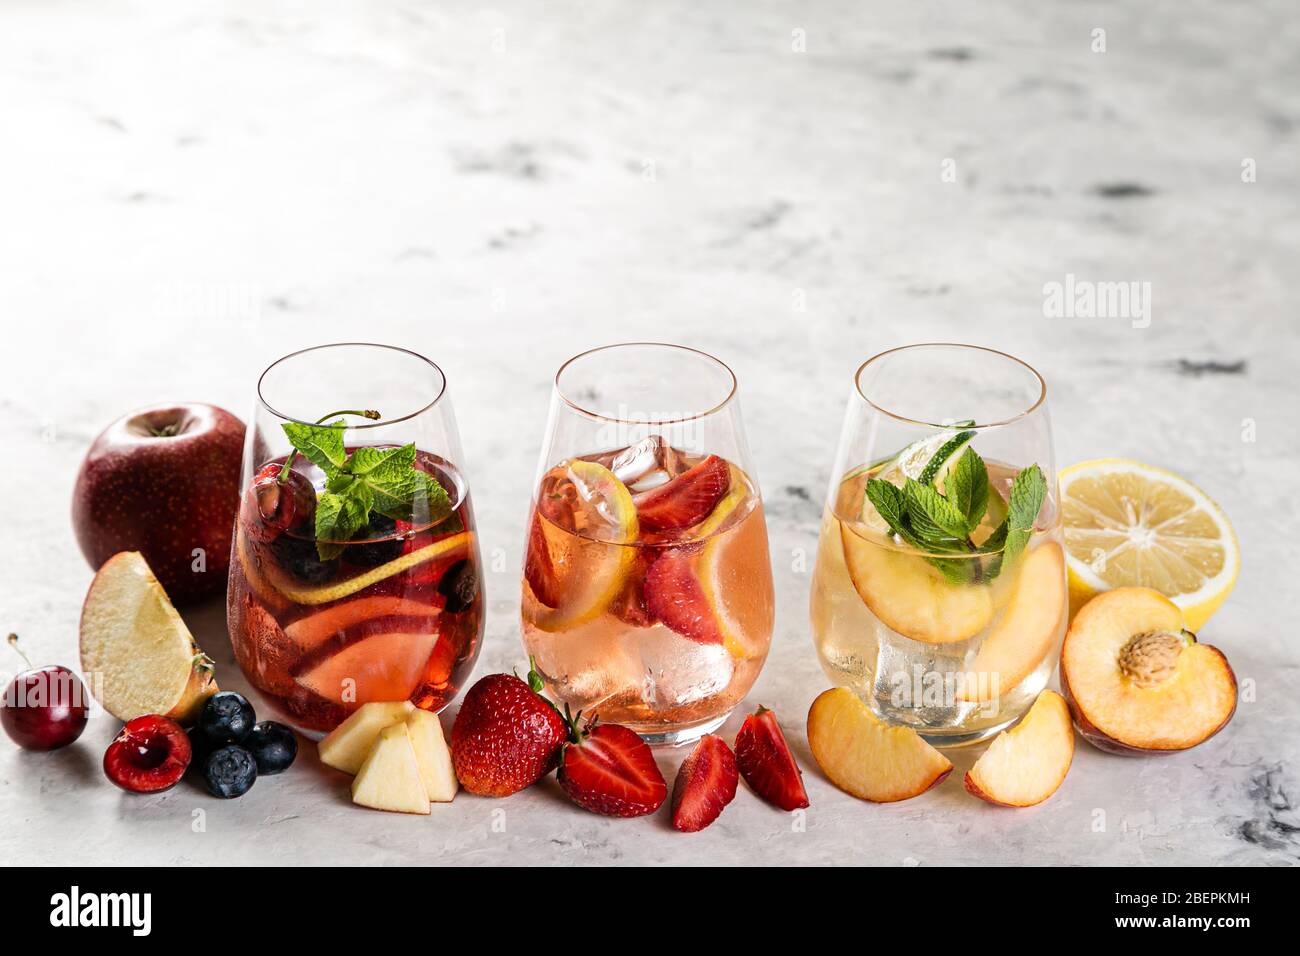 https://c8.alamy.com/comp/2BEPKMH/selection-of-sangrias-red-pink-white-and-ingredients-2BEPKMH.jpg